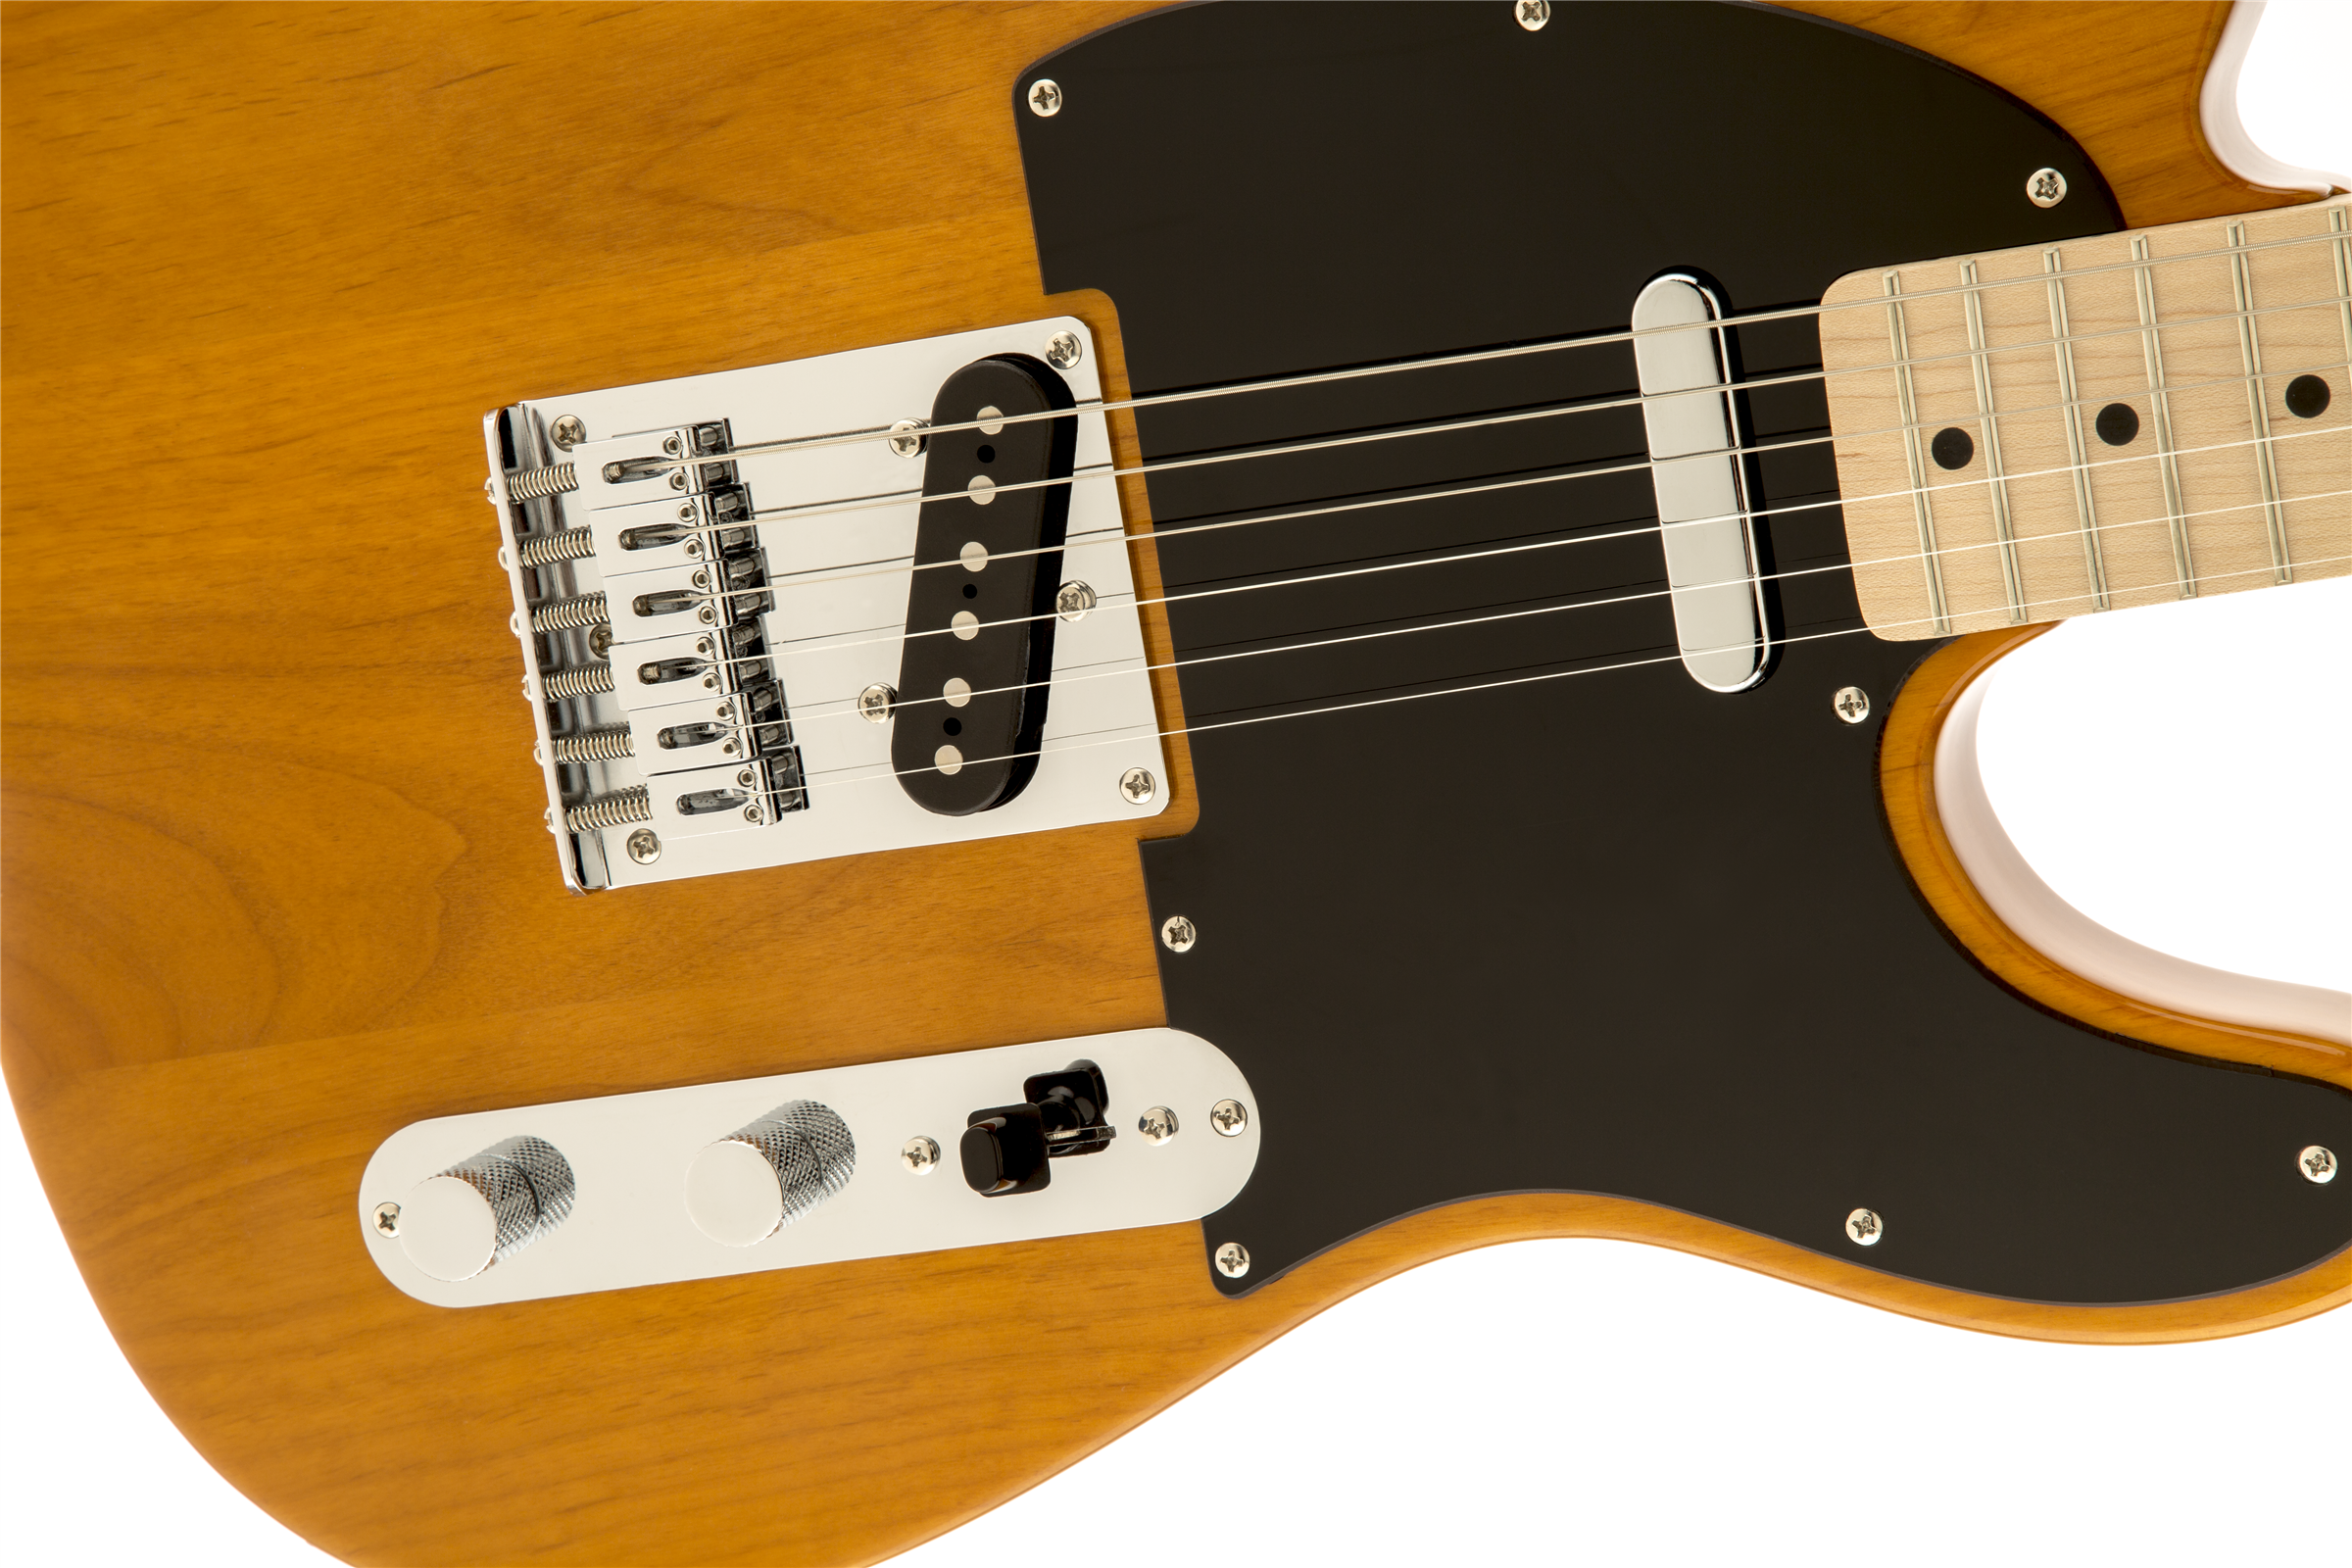 Squier Affinity Series™ Telecaster®, Maple Fingerboard, Butterscotch Blonde電結他